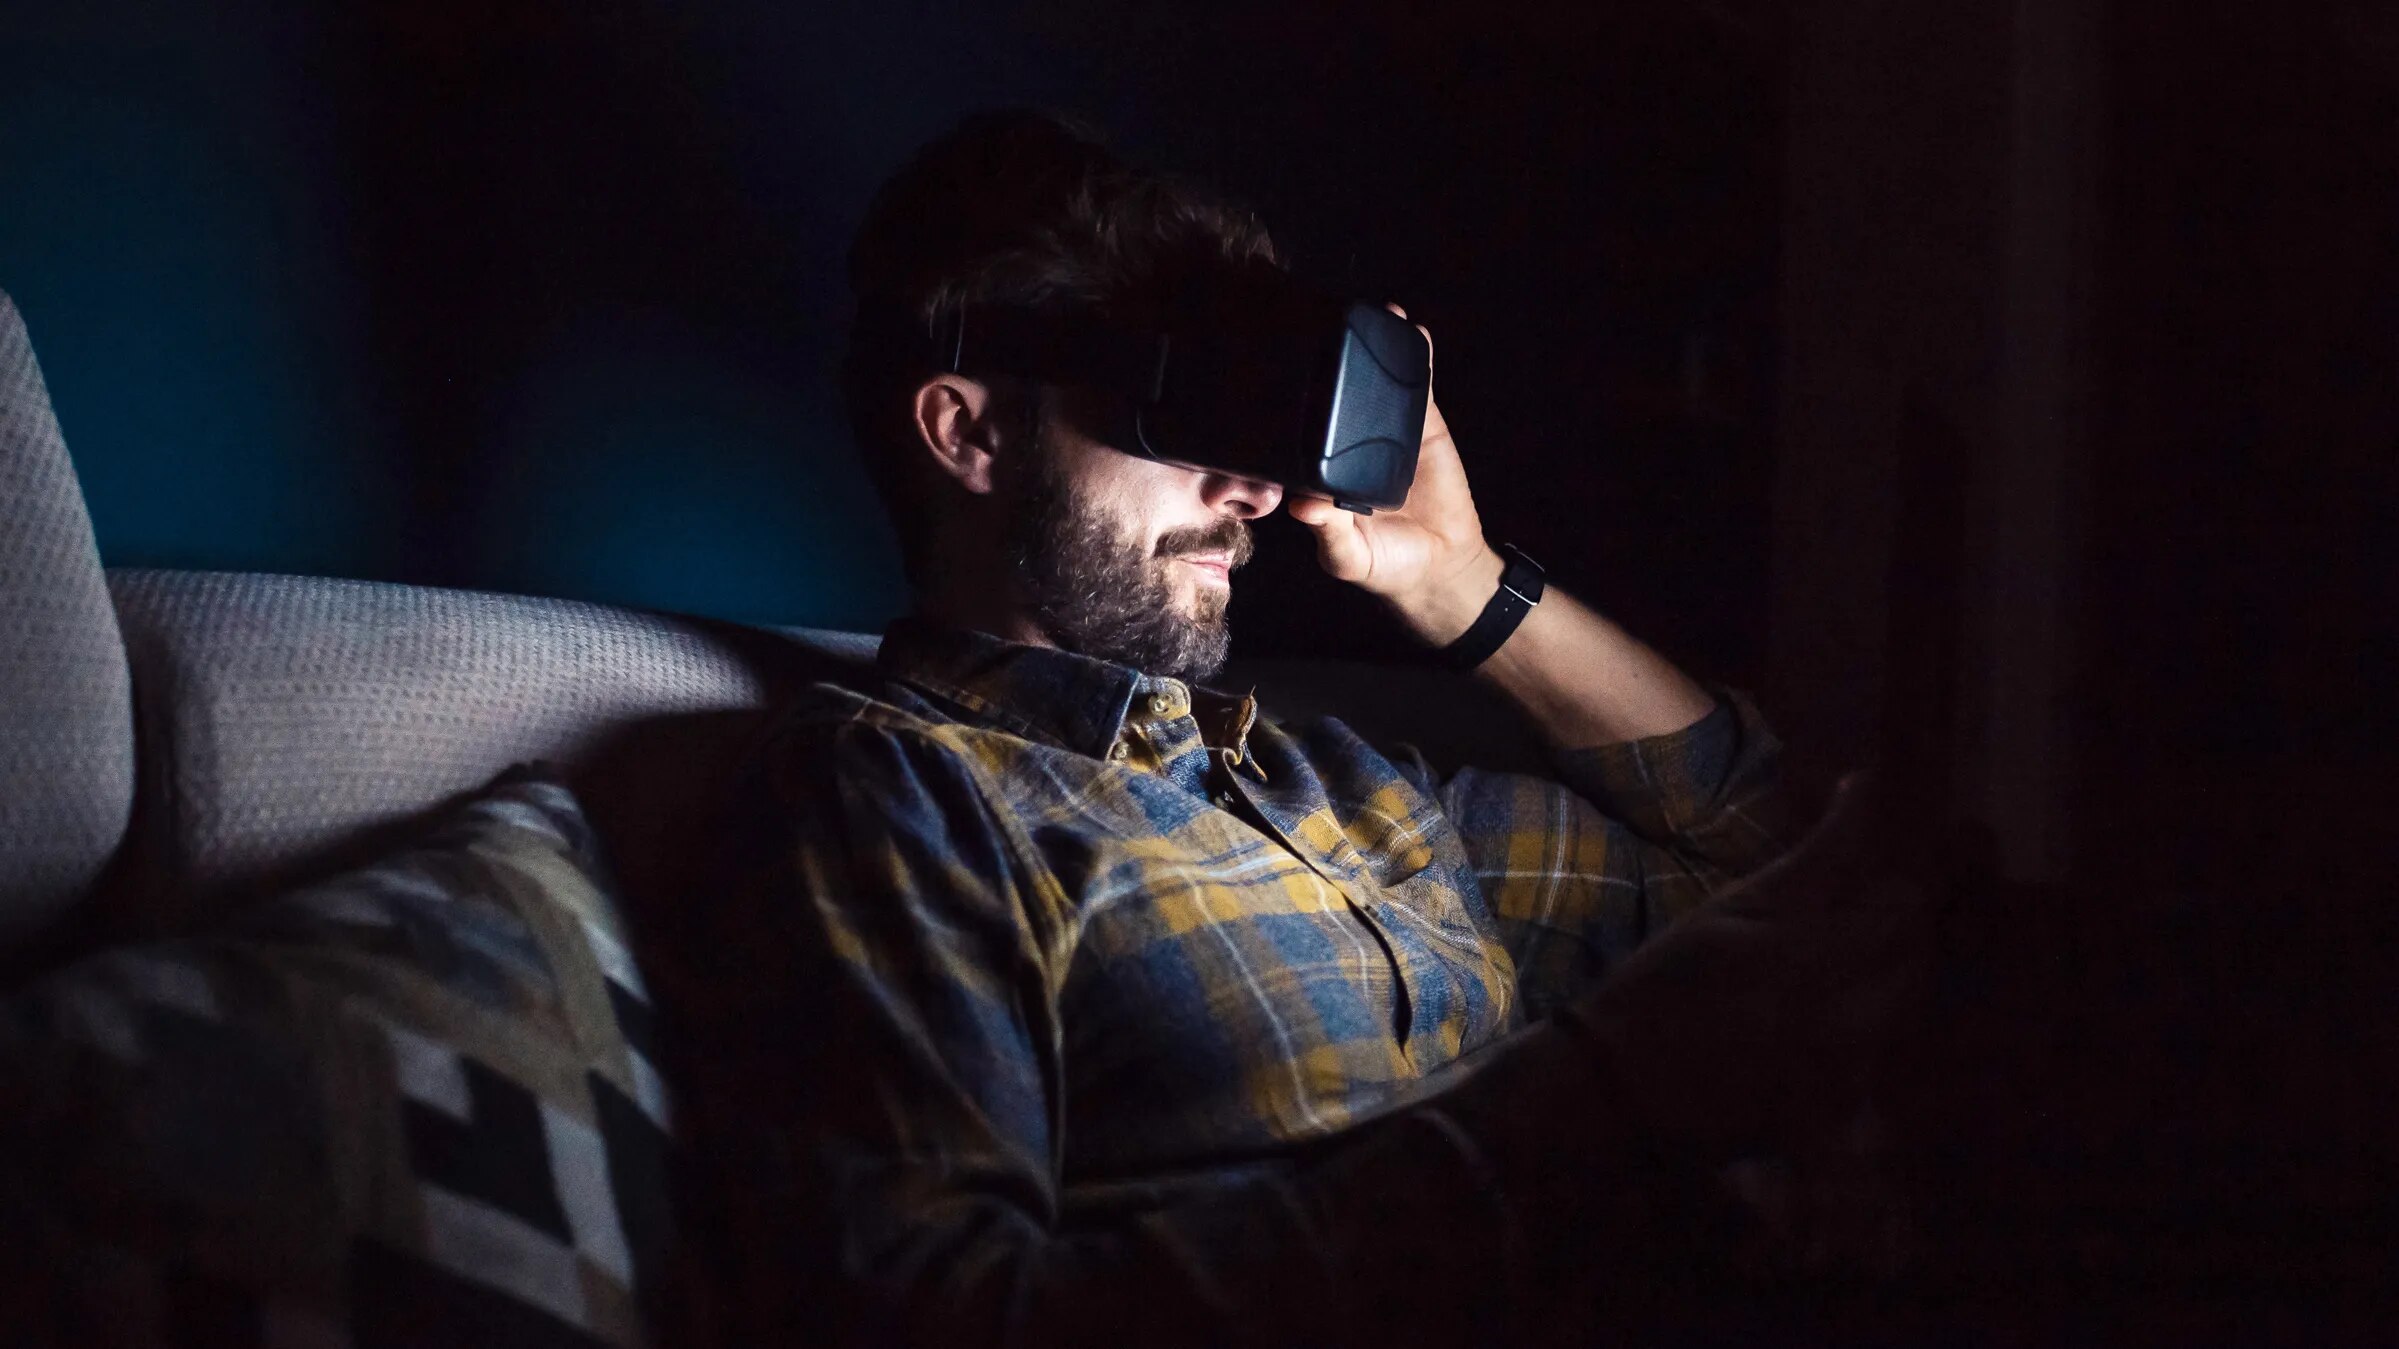 How To Watch Movies With VR Headset